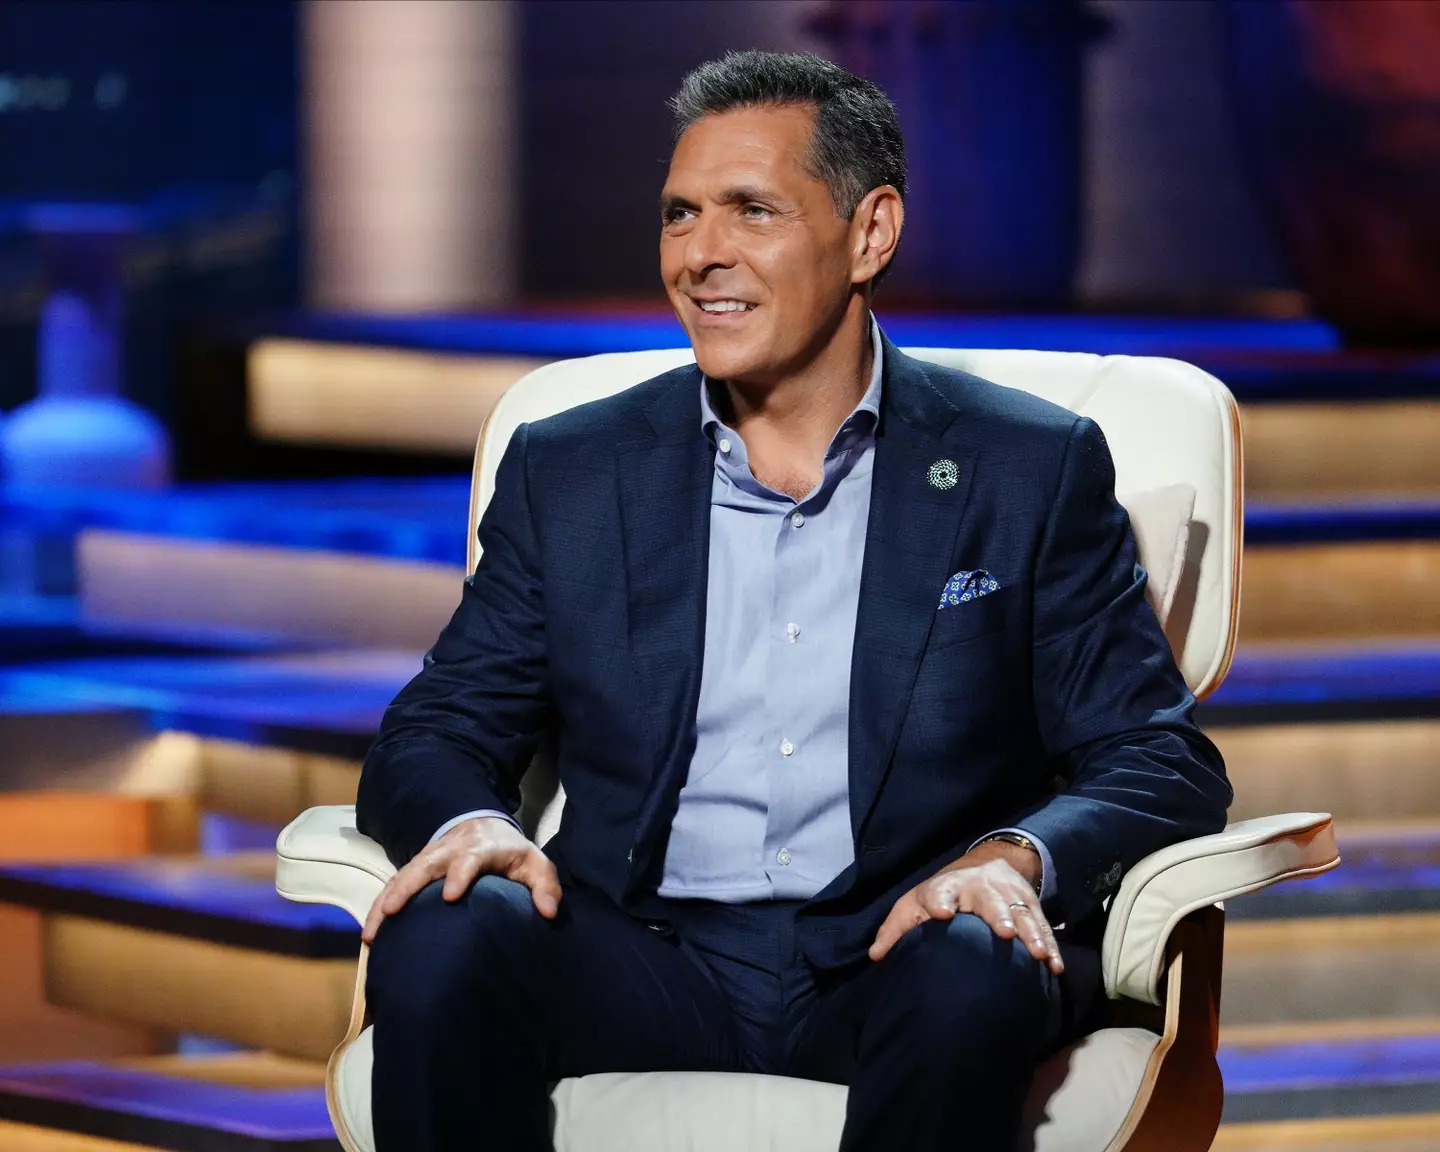 Lubetzky in an appearance on Shark Tank. (Christopher Willard/ABC via Getty Images)